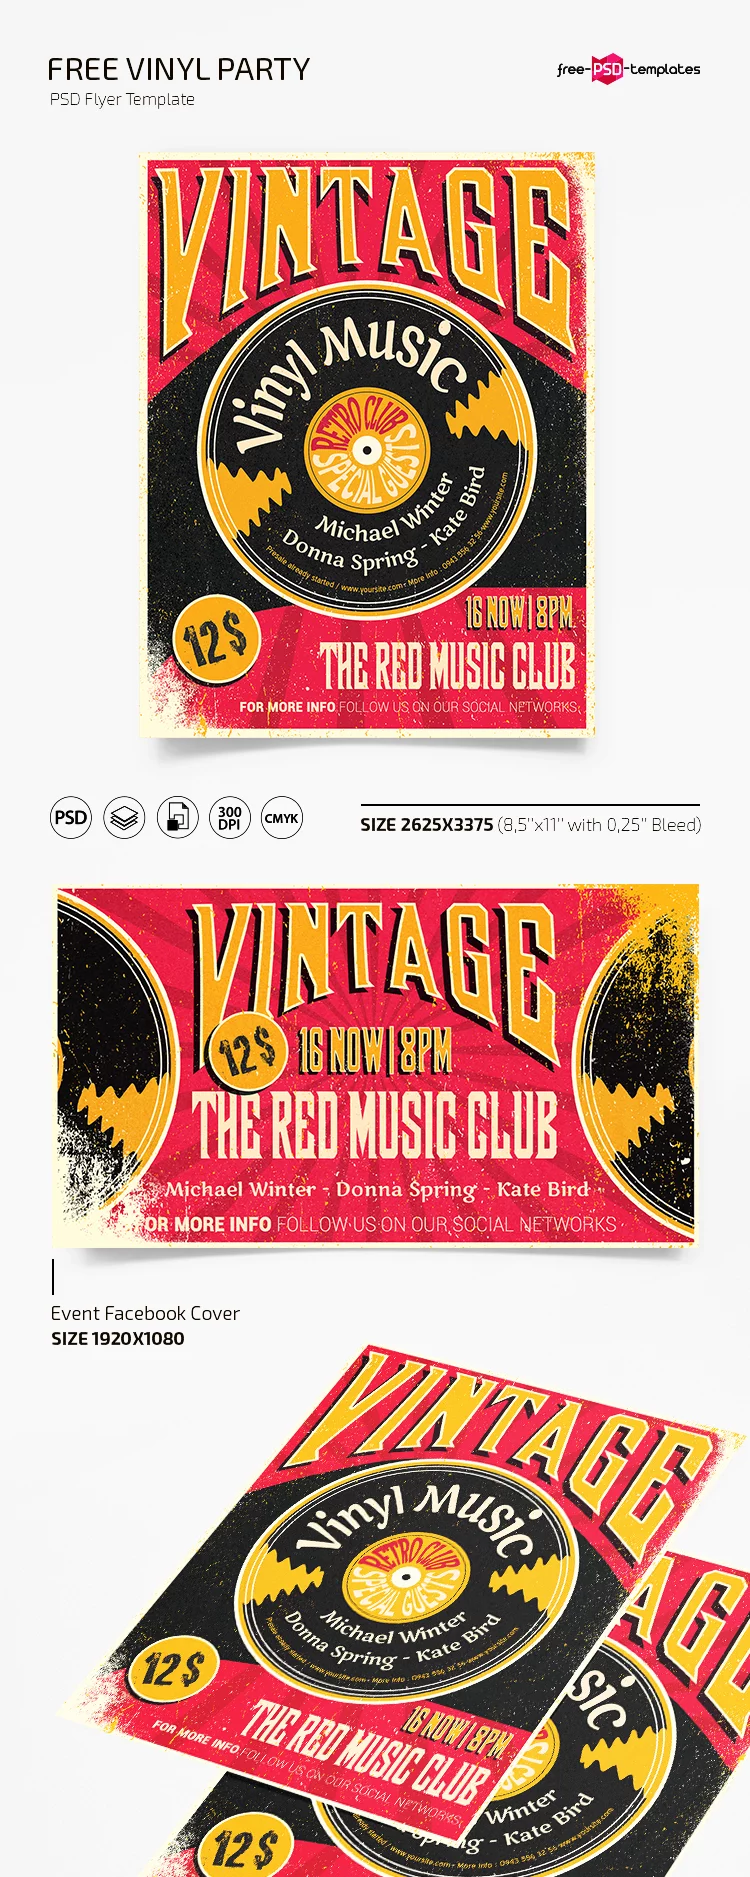 Free Event Flyer Template- Vinyl party (PSD)